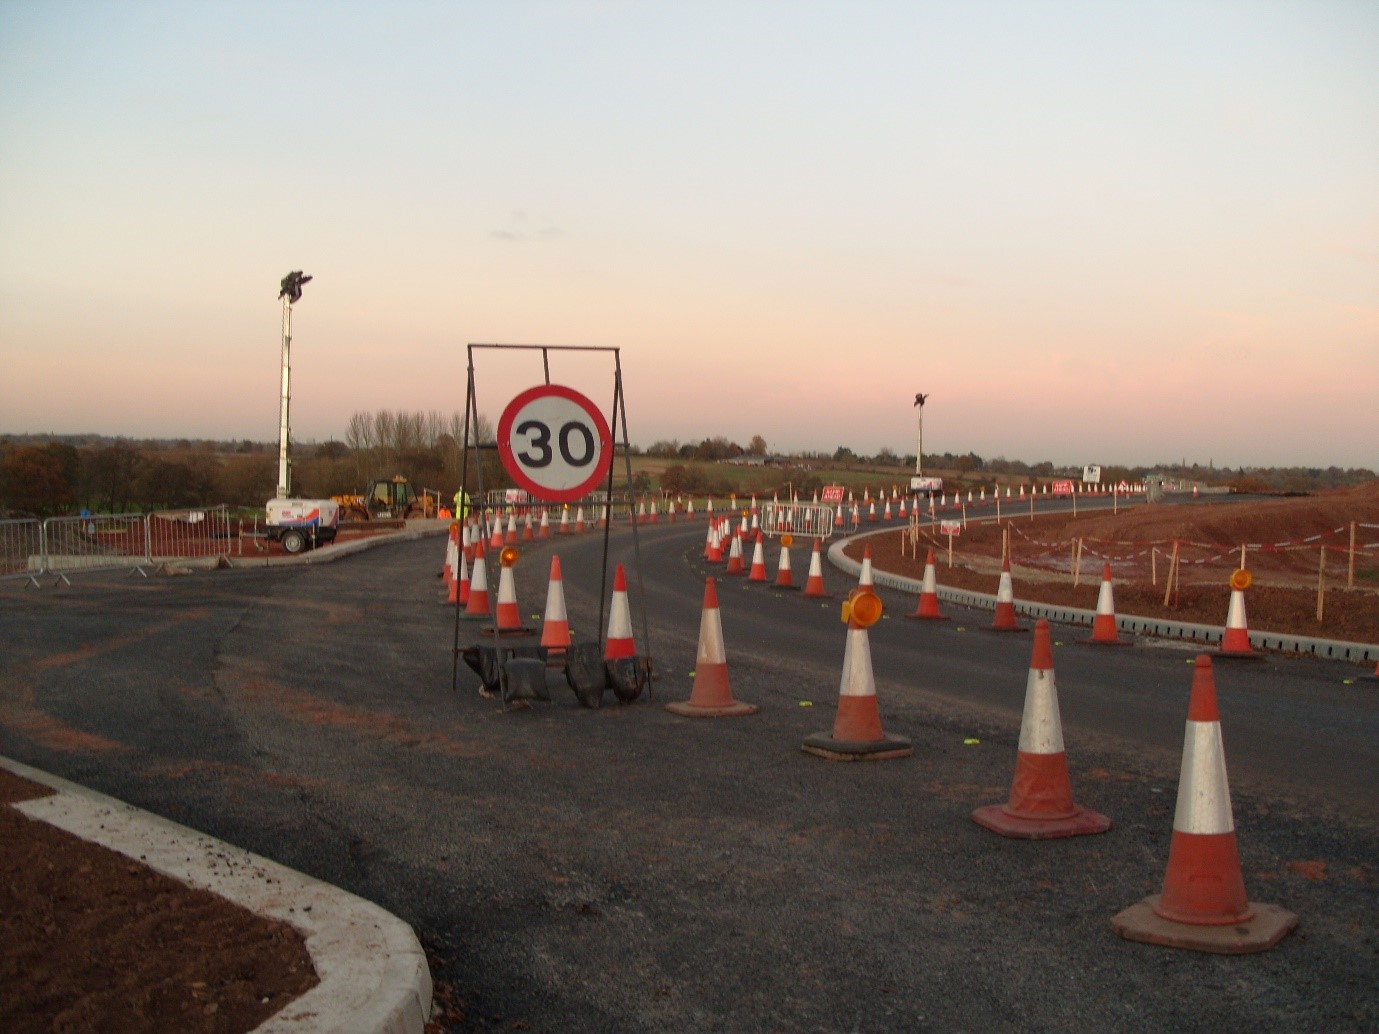 Figure 4 –Western Gyratory Connecting to Northbound Slip Road.  Area has been coned off to create a safe working area for ongoing operations around the road.  A temporary running surface is being used in this location.